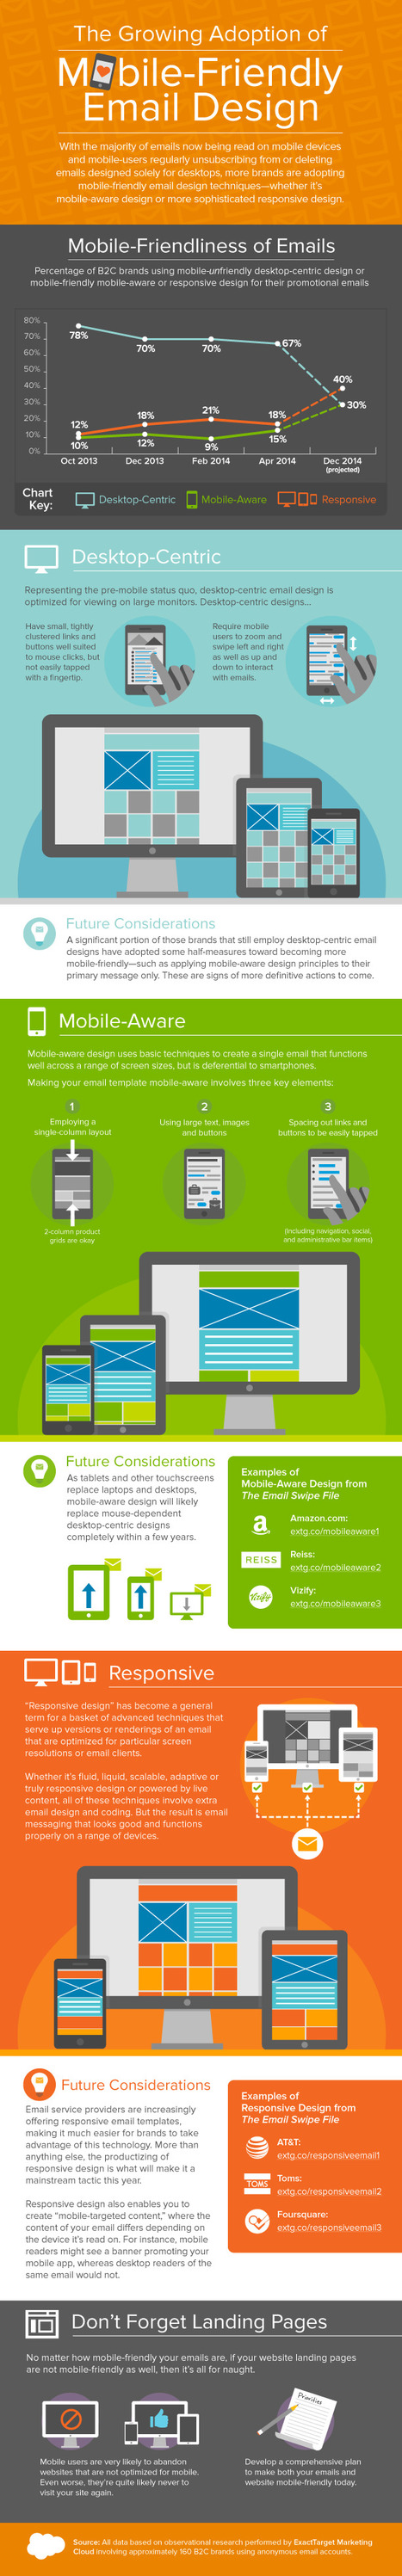 Infographic: The Growing Adoption of Mobile-Friendly Email Design - Email Marketing Rules | Mobile Trends | Scoop.it